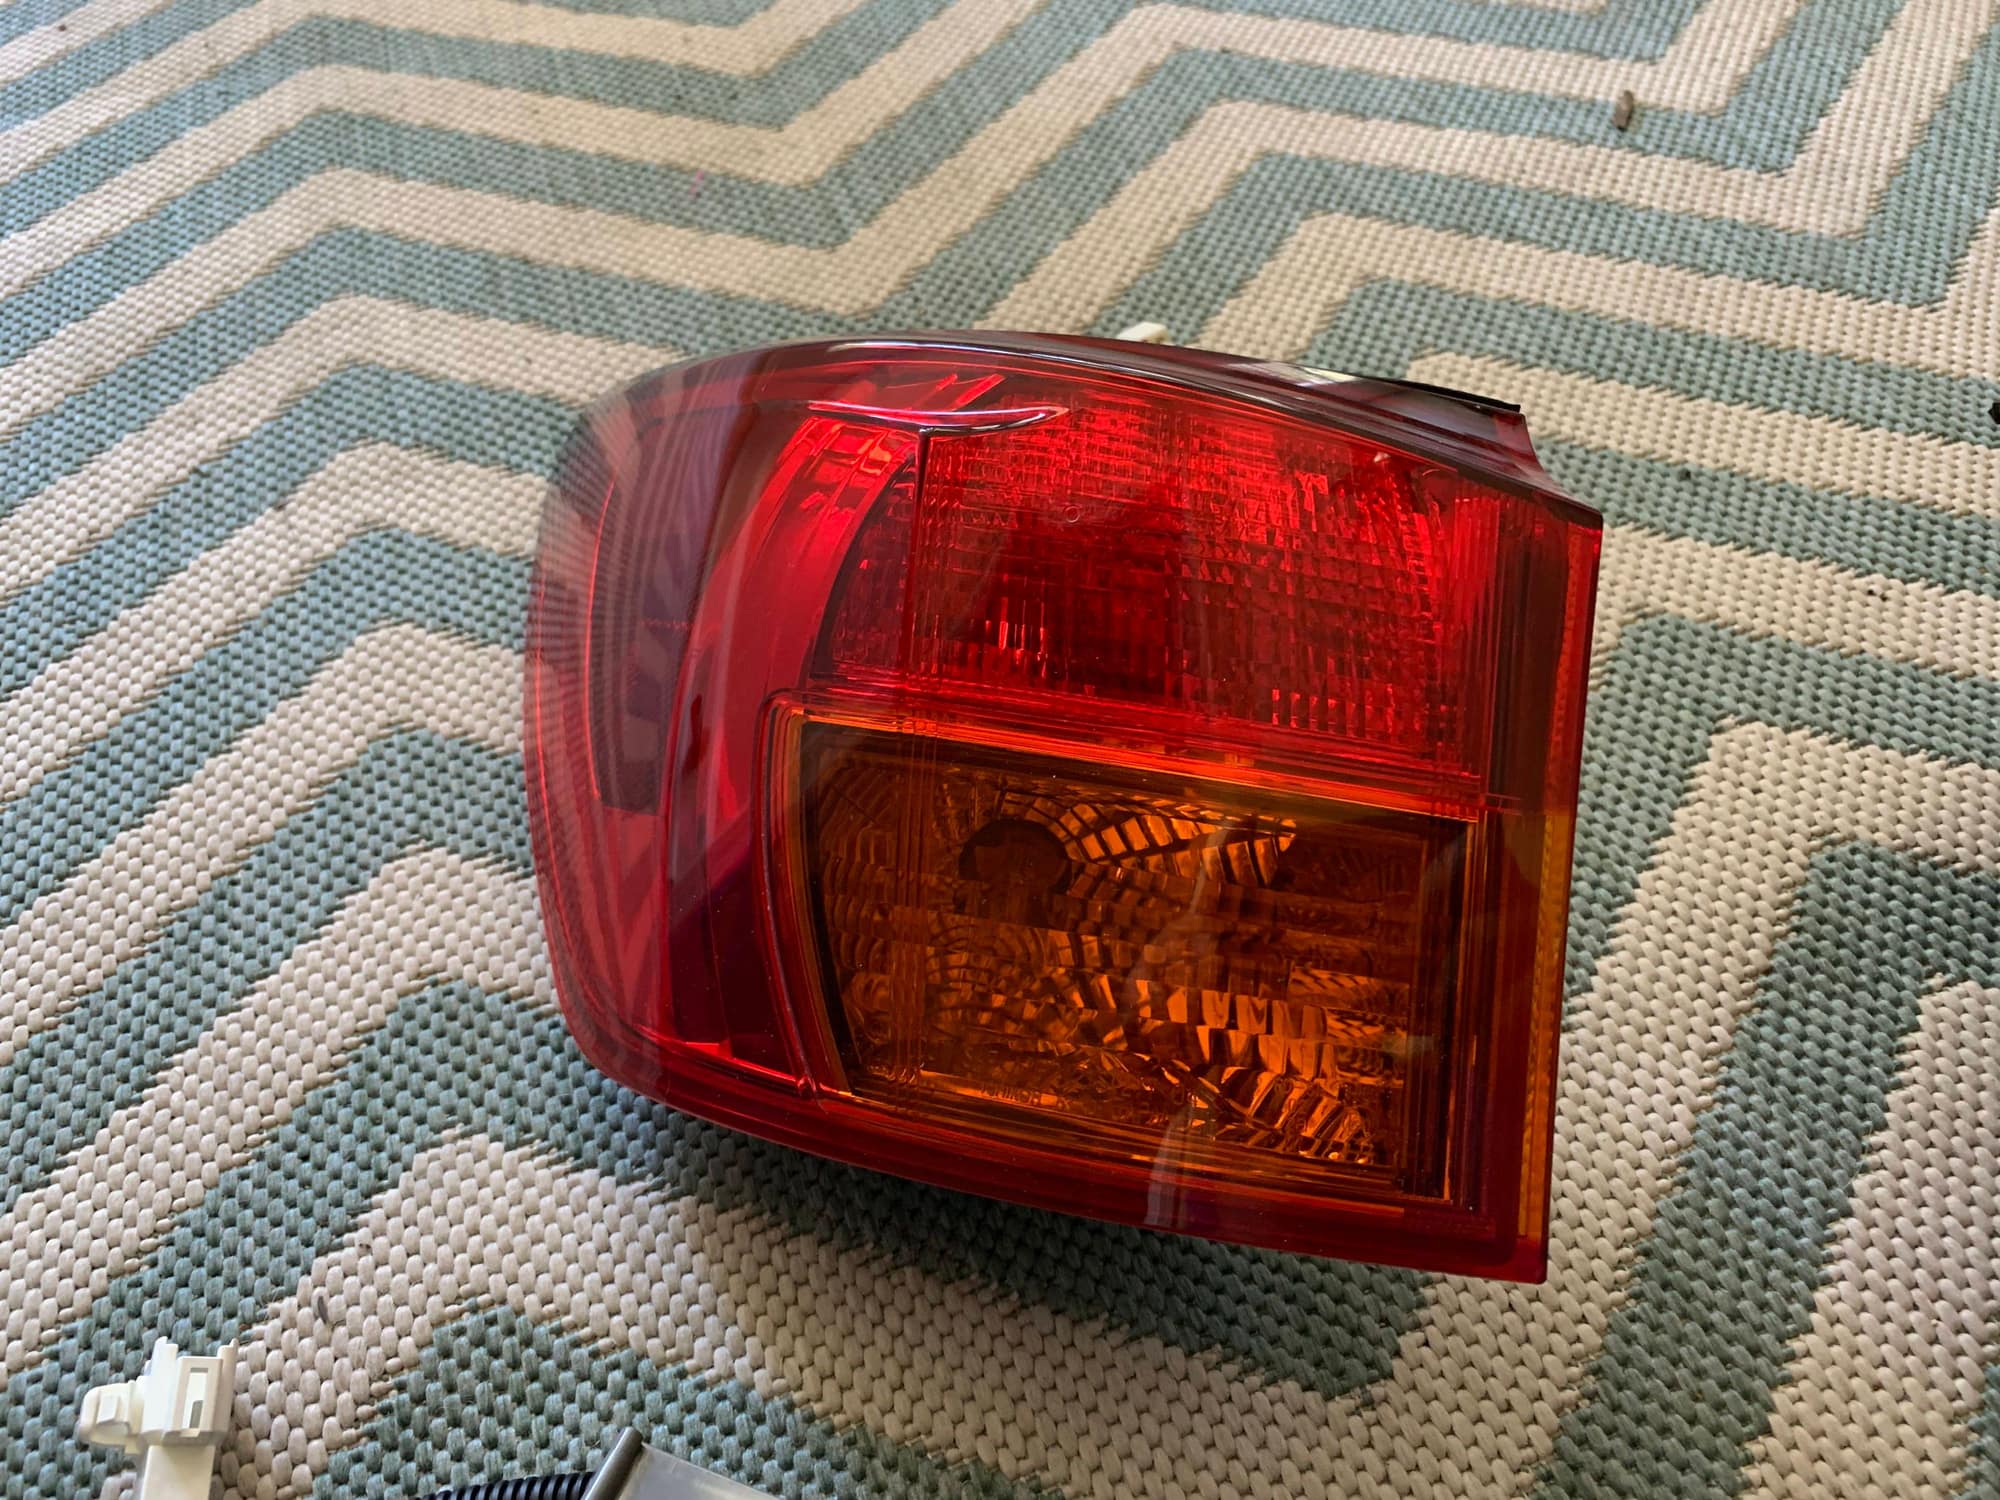 Lights - FS: 06-08 ISx50 Tail Lights - Complete Set - Used - 2006 to 2013 Lexus IS250 - 2006 to 2013 Lexus IS350 - 2008 to 2014 Lexus IS F - Baton Rouge, LA 70817, United States